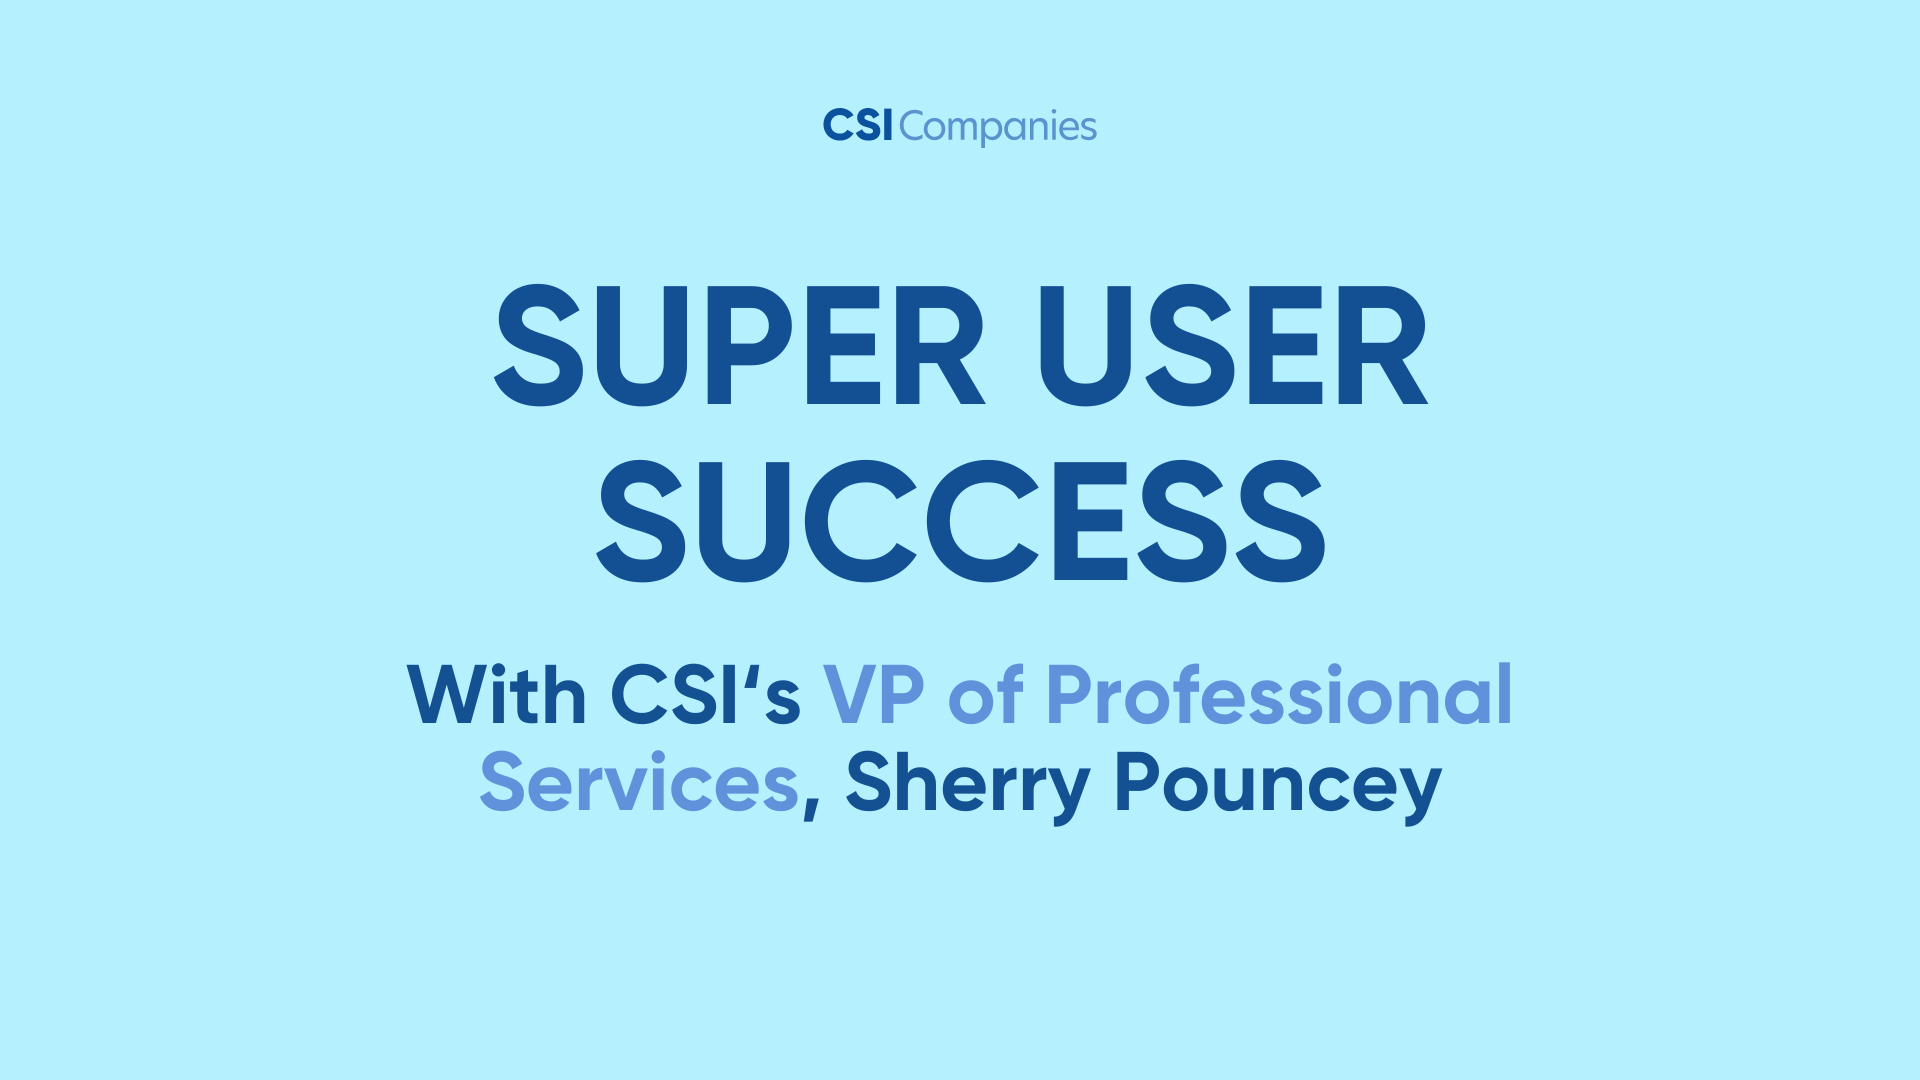 Super User Success with Sherry Pouncey